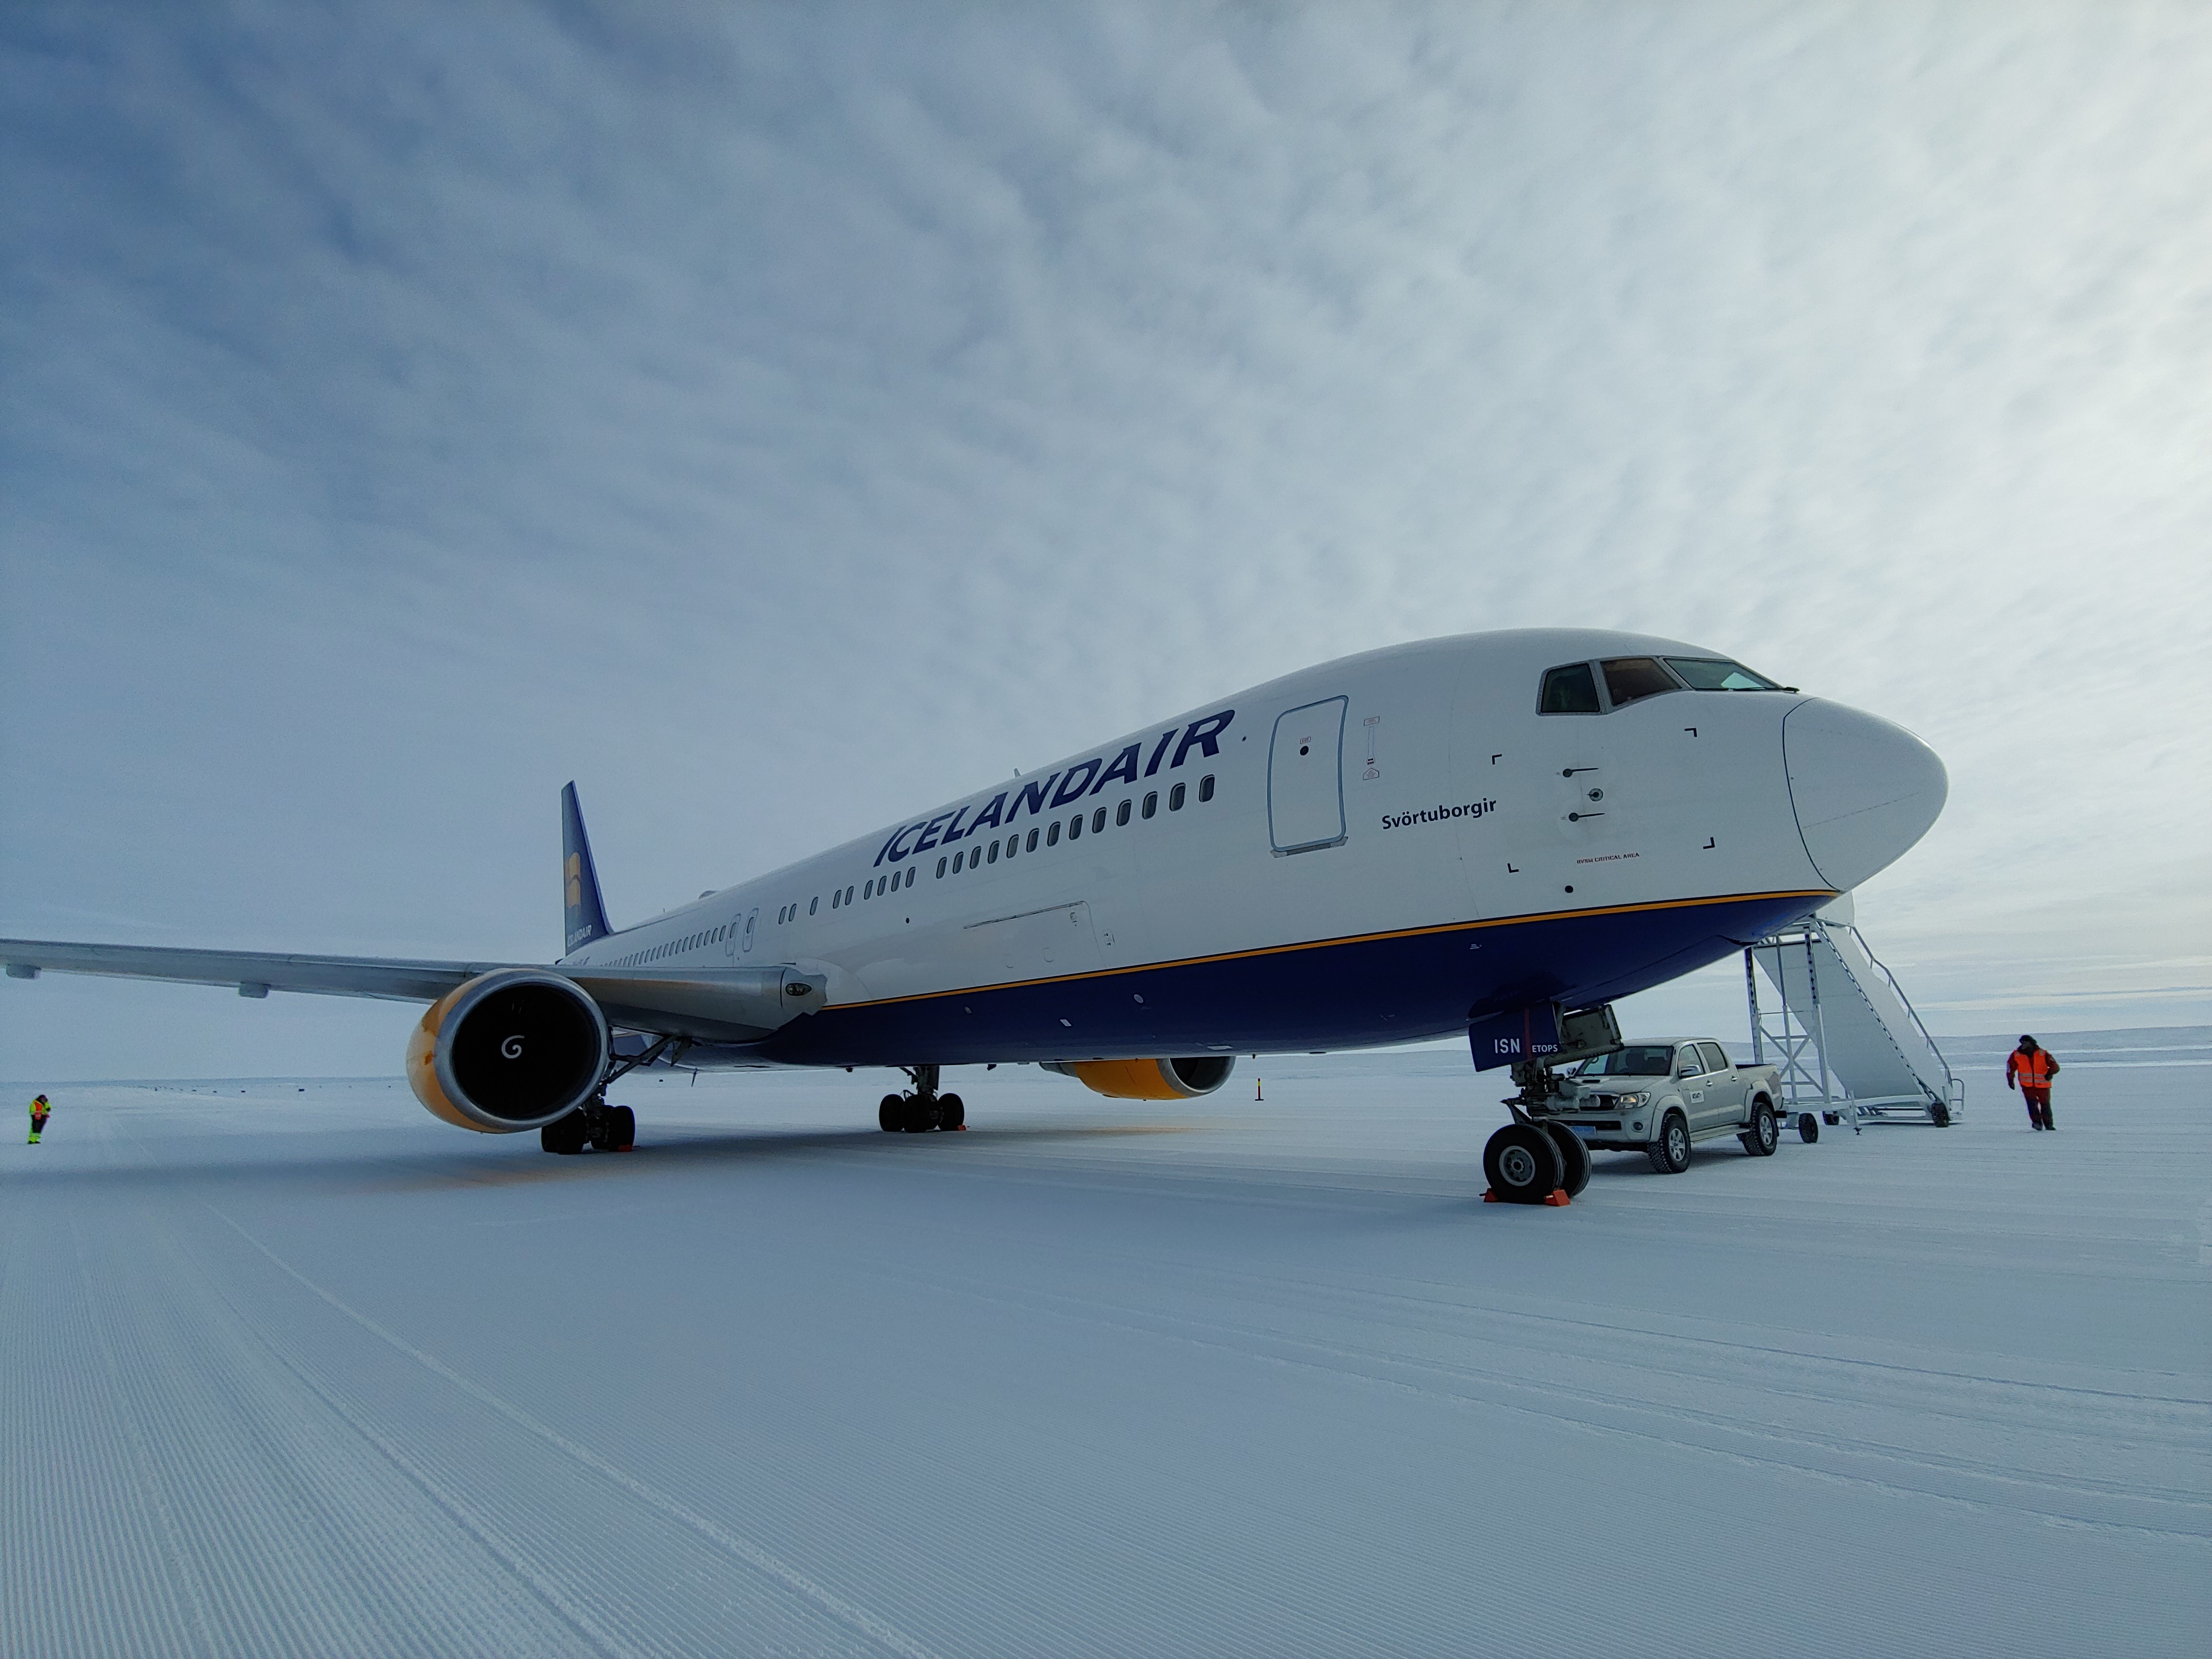 The Icelandair aircraft stationary with the stairs down, pictured on a snowy runway in Antarctica